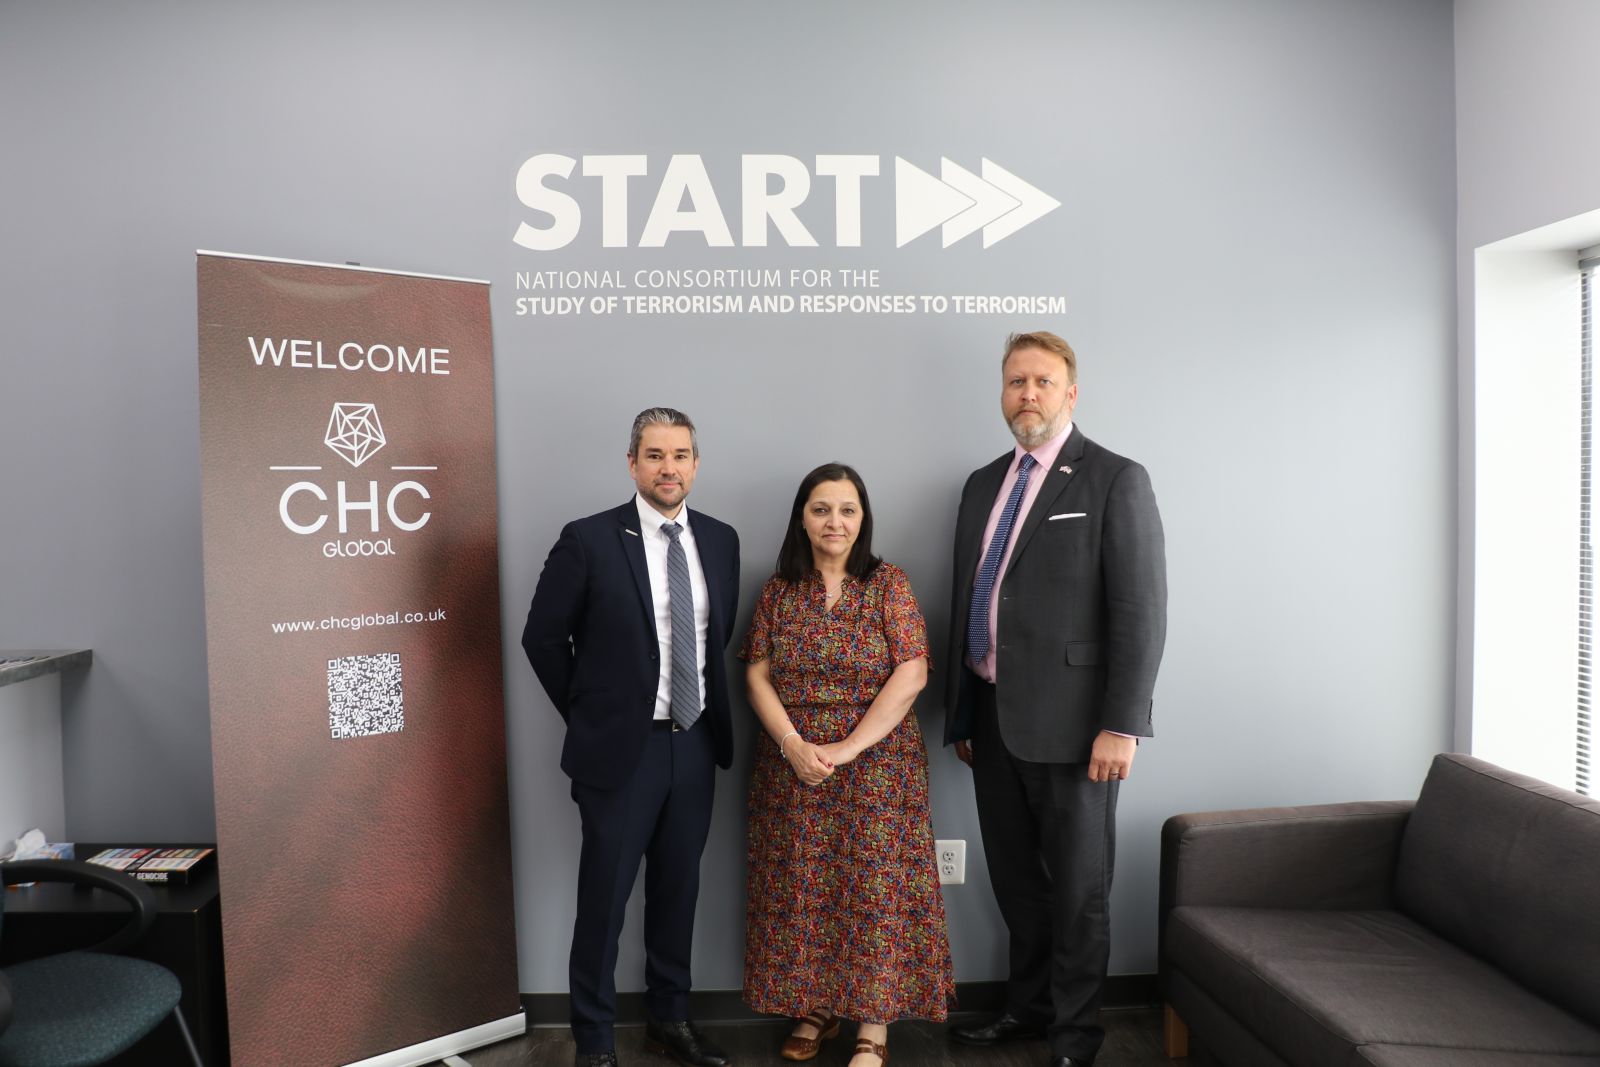 Bill Braniff, Figen Murray, and Chris Holt standing against a gray wall with the START logo in white text overhead, next to a red banner with white text reading Welcome with the CHC Global logo